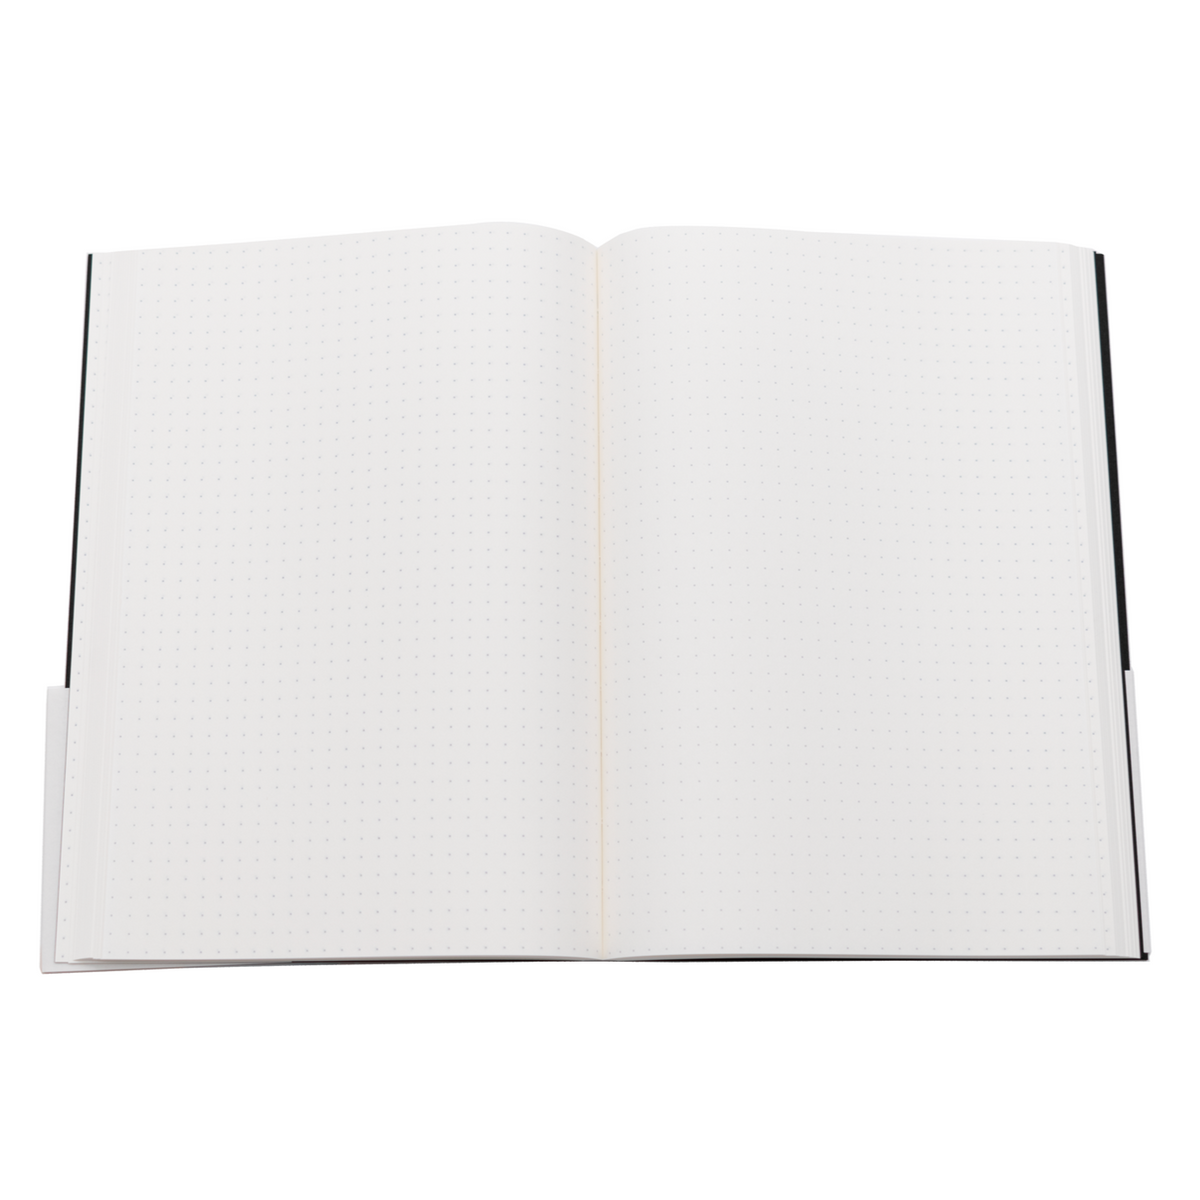 Tomoe River Hard Cover White 52gsm 368 Page A5 Notebook - Grid